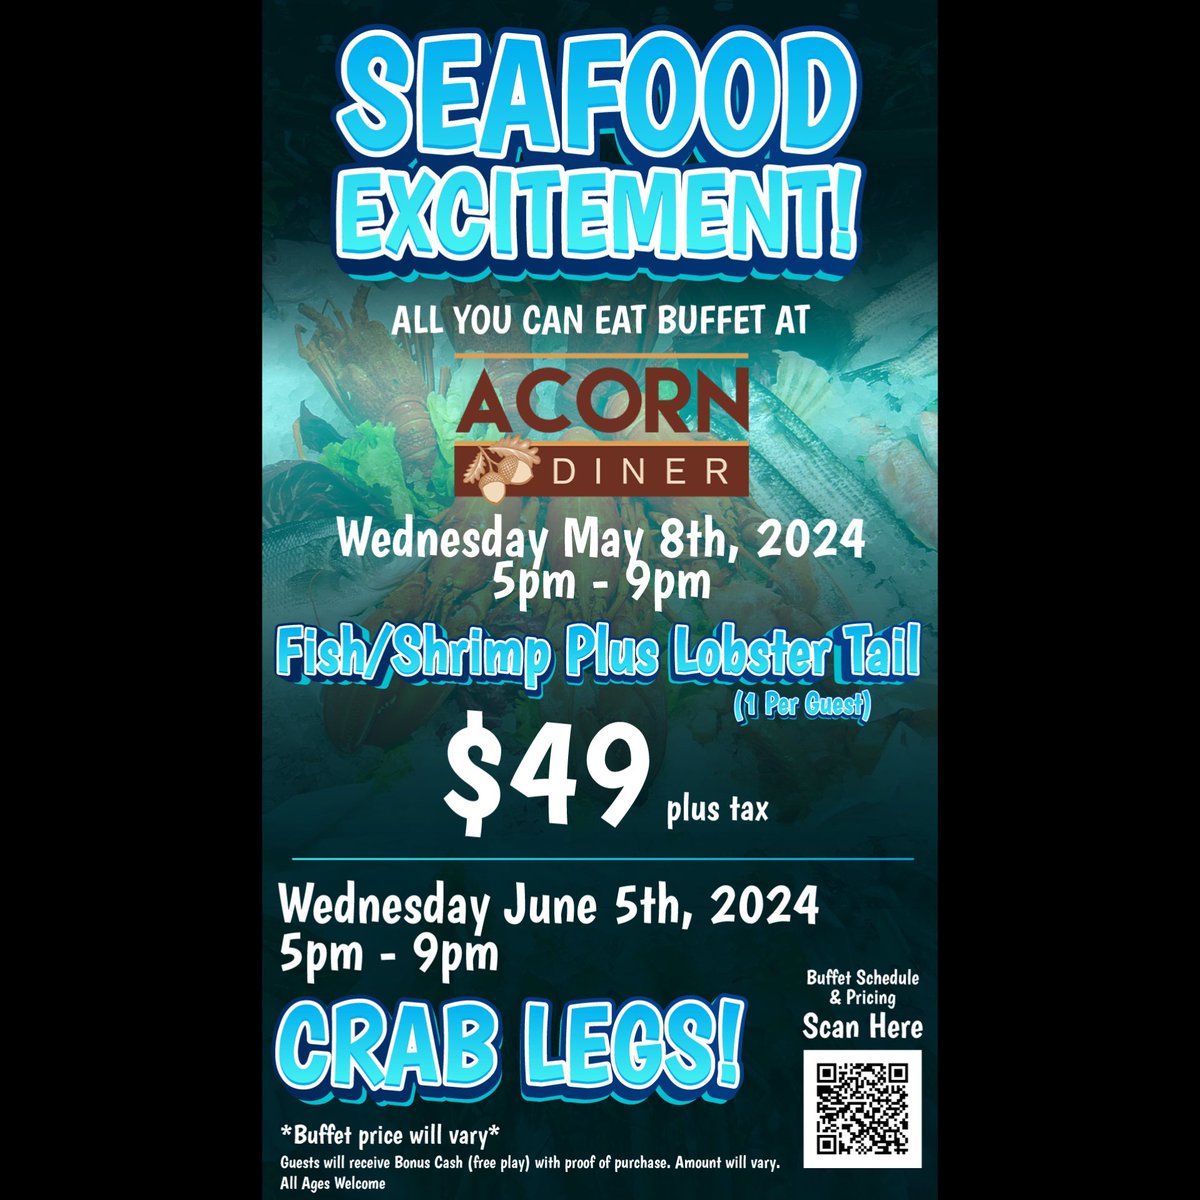 ALL YOU CAN EAT SEAFOOD BUFFET kicks off This Wednesday May 8th, 5pm-9pm!…. And mark your calendars for Crab Legs on June 5th! 

#allyoucaneat #seafood #shrimp #fish #lobstertail #crablegs #acorndiner #emctheplacetobe #eaglemountaincasino #thepeoplescasino